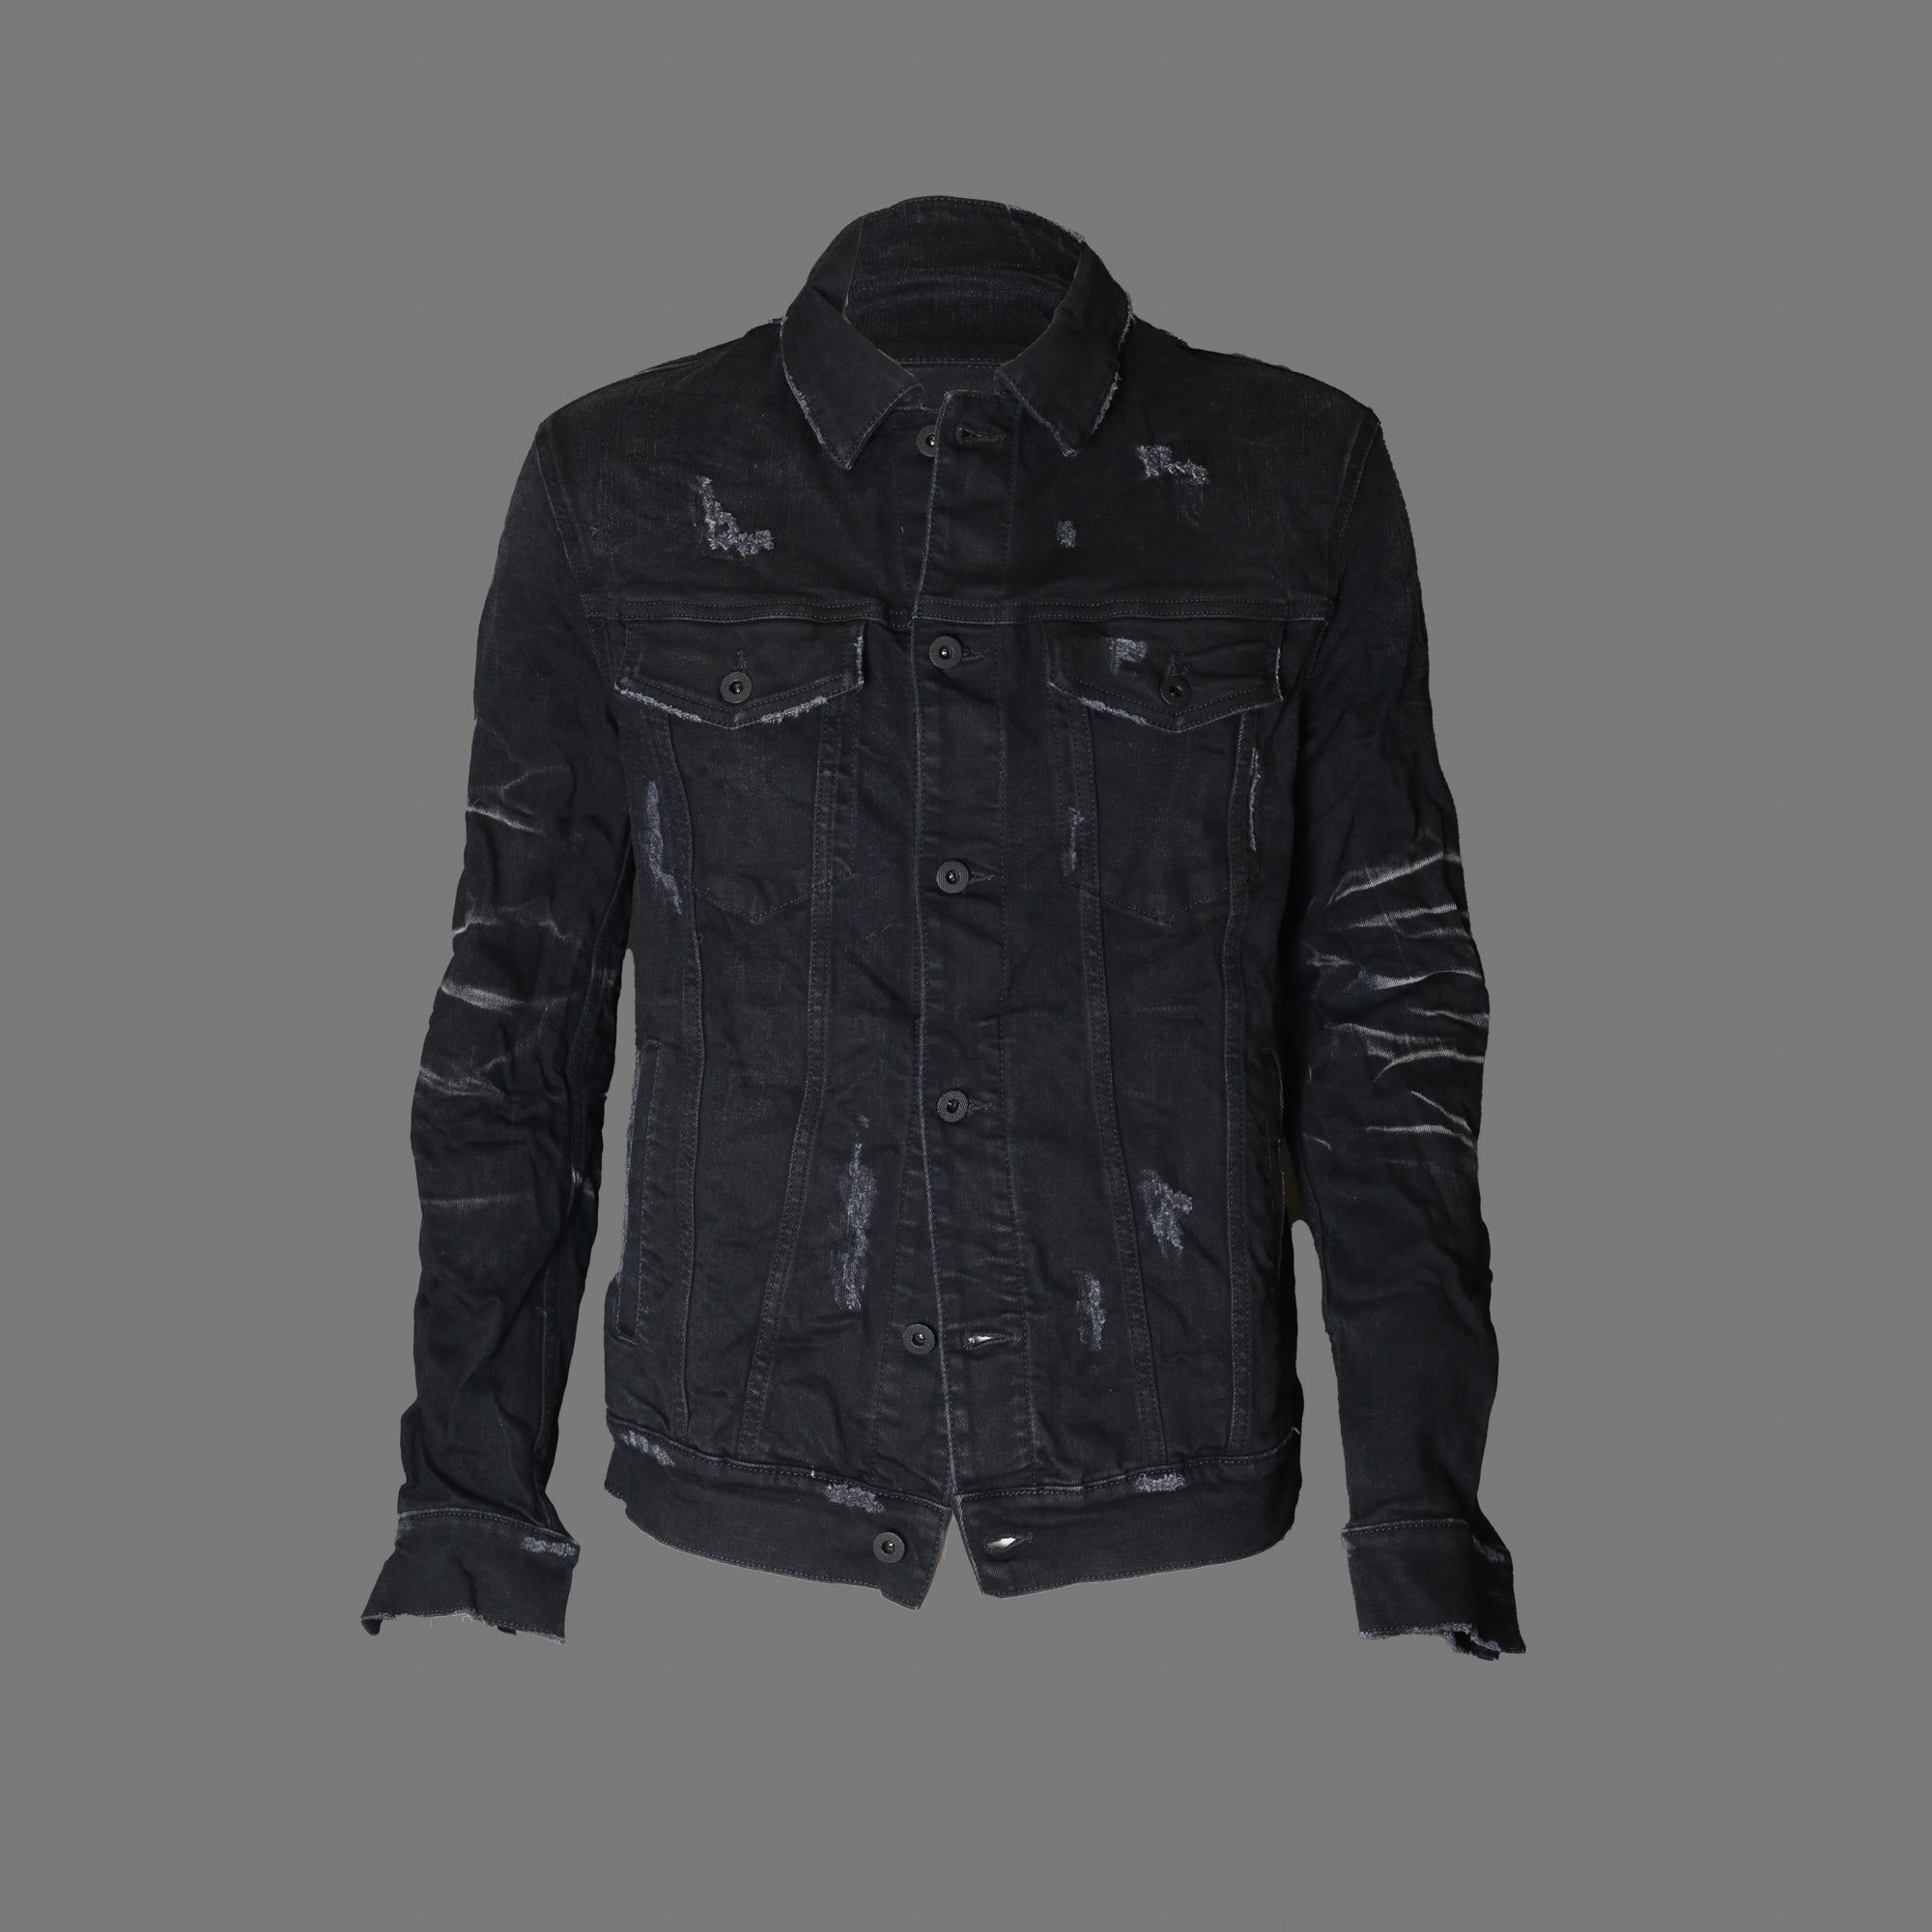 Not specified Jacket MD75 9283 Black